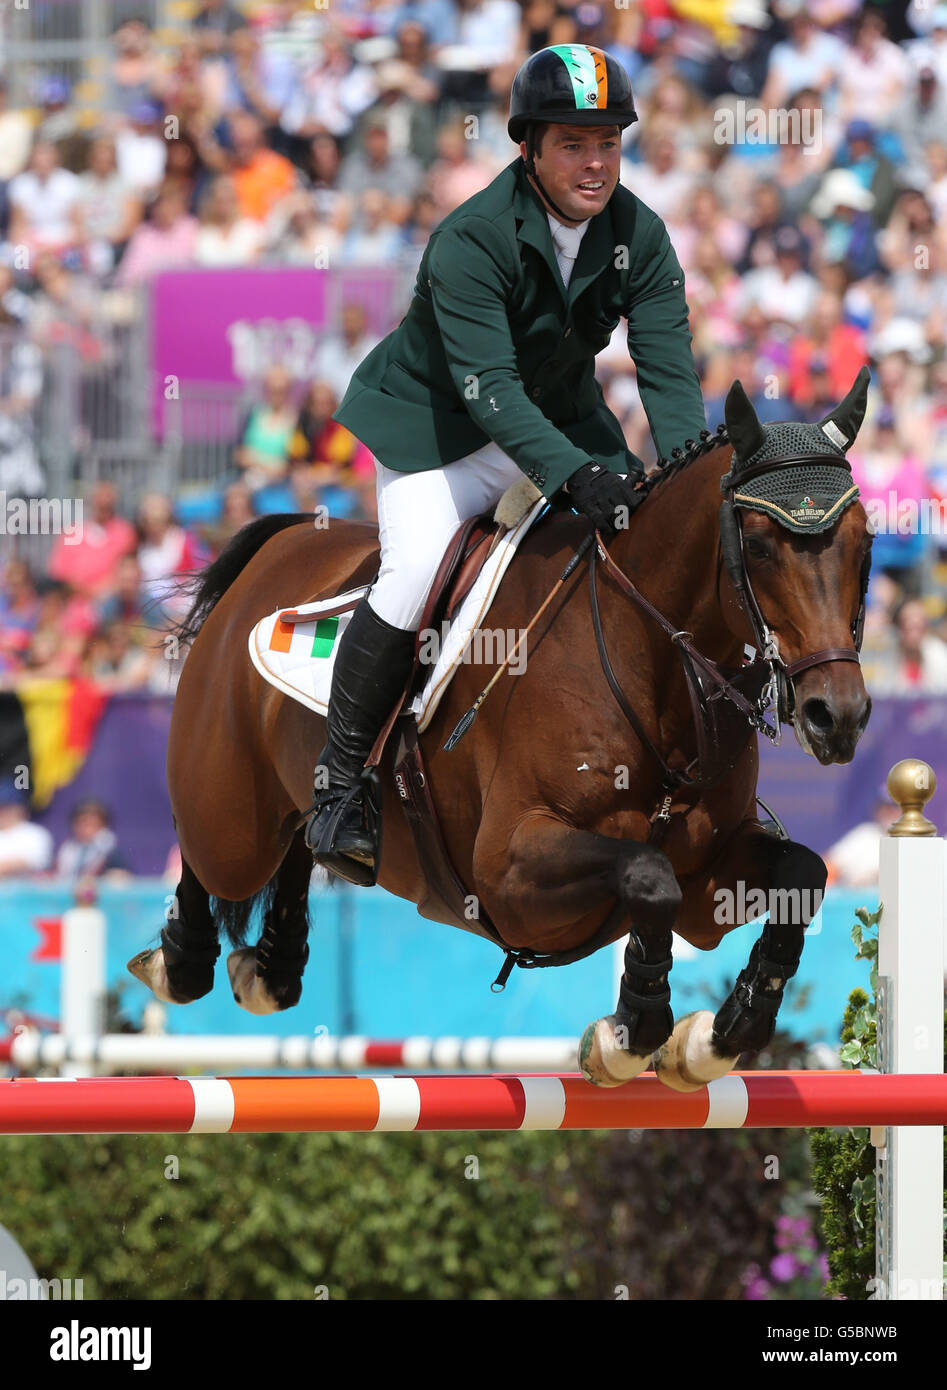 Ireland's Cian O'Connor rides Blue Loyd 12 during the Equestrian Team Jumping, at Greenwich Park, during day ten of the London 2012 Olympics. Stock Photo